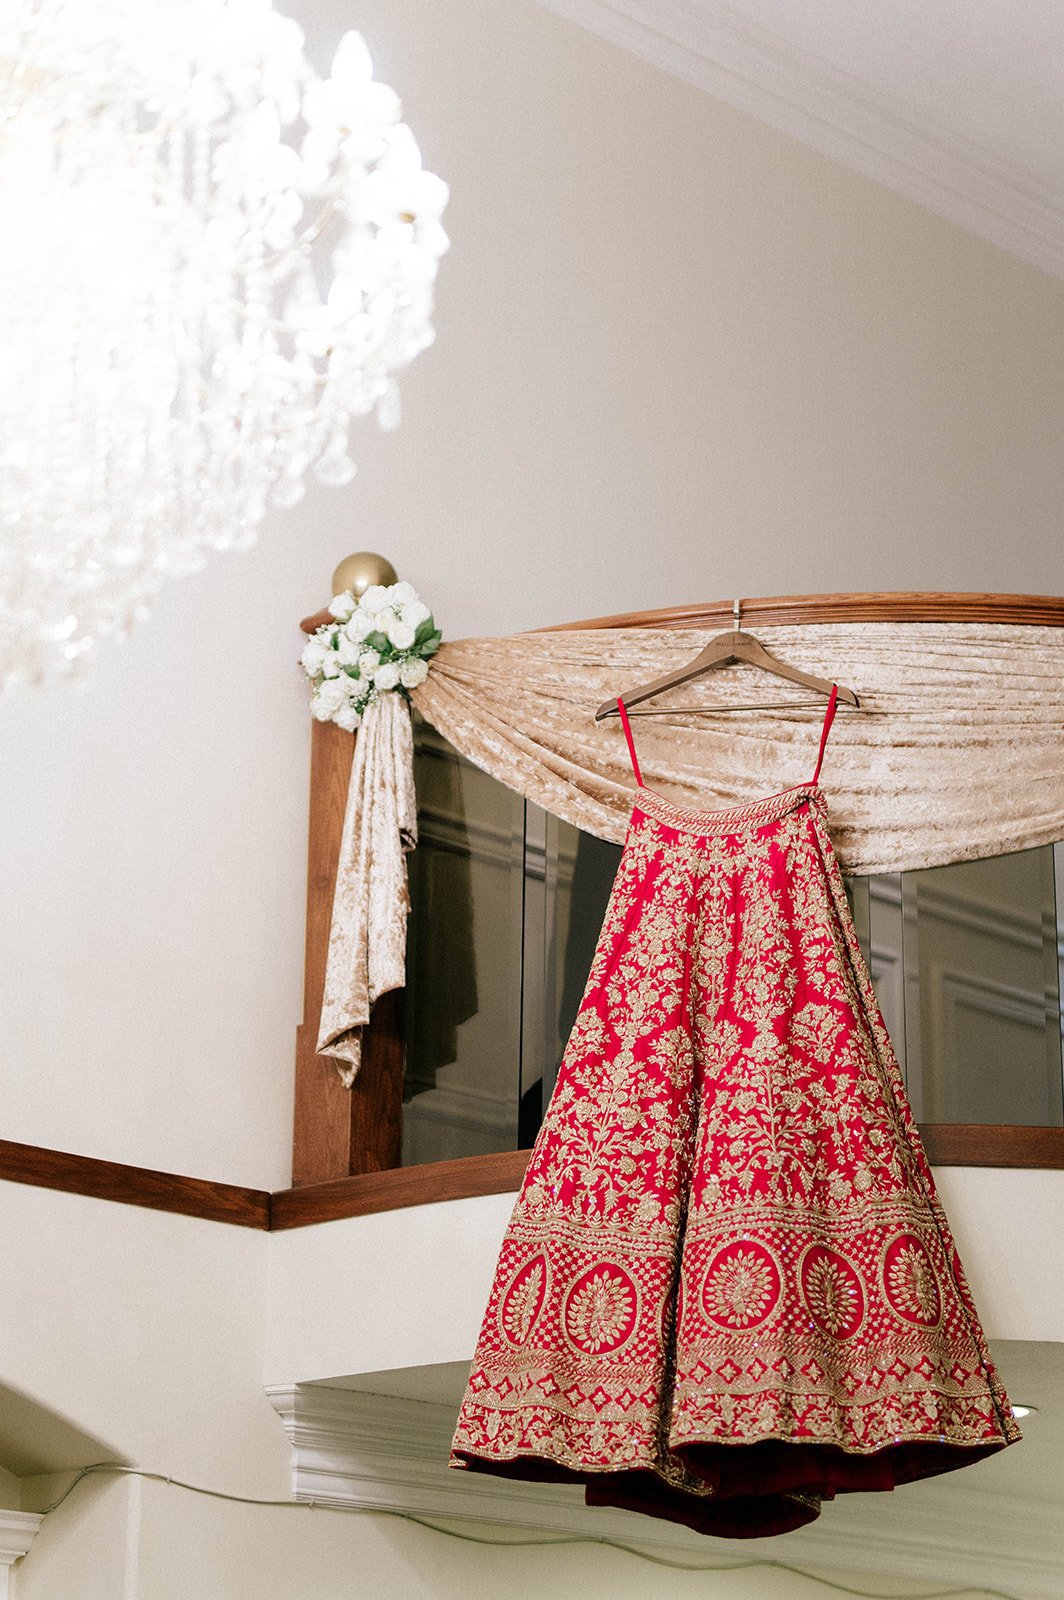 A red bridal lehenga hangs from a loft, next to a chandelier 